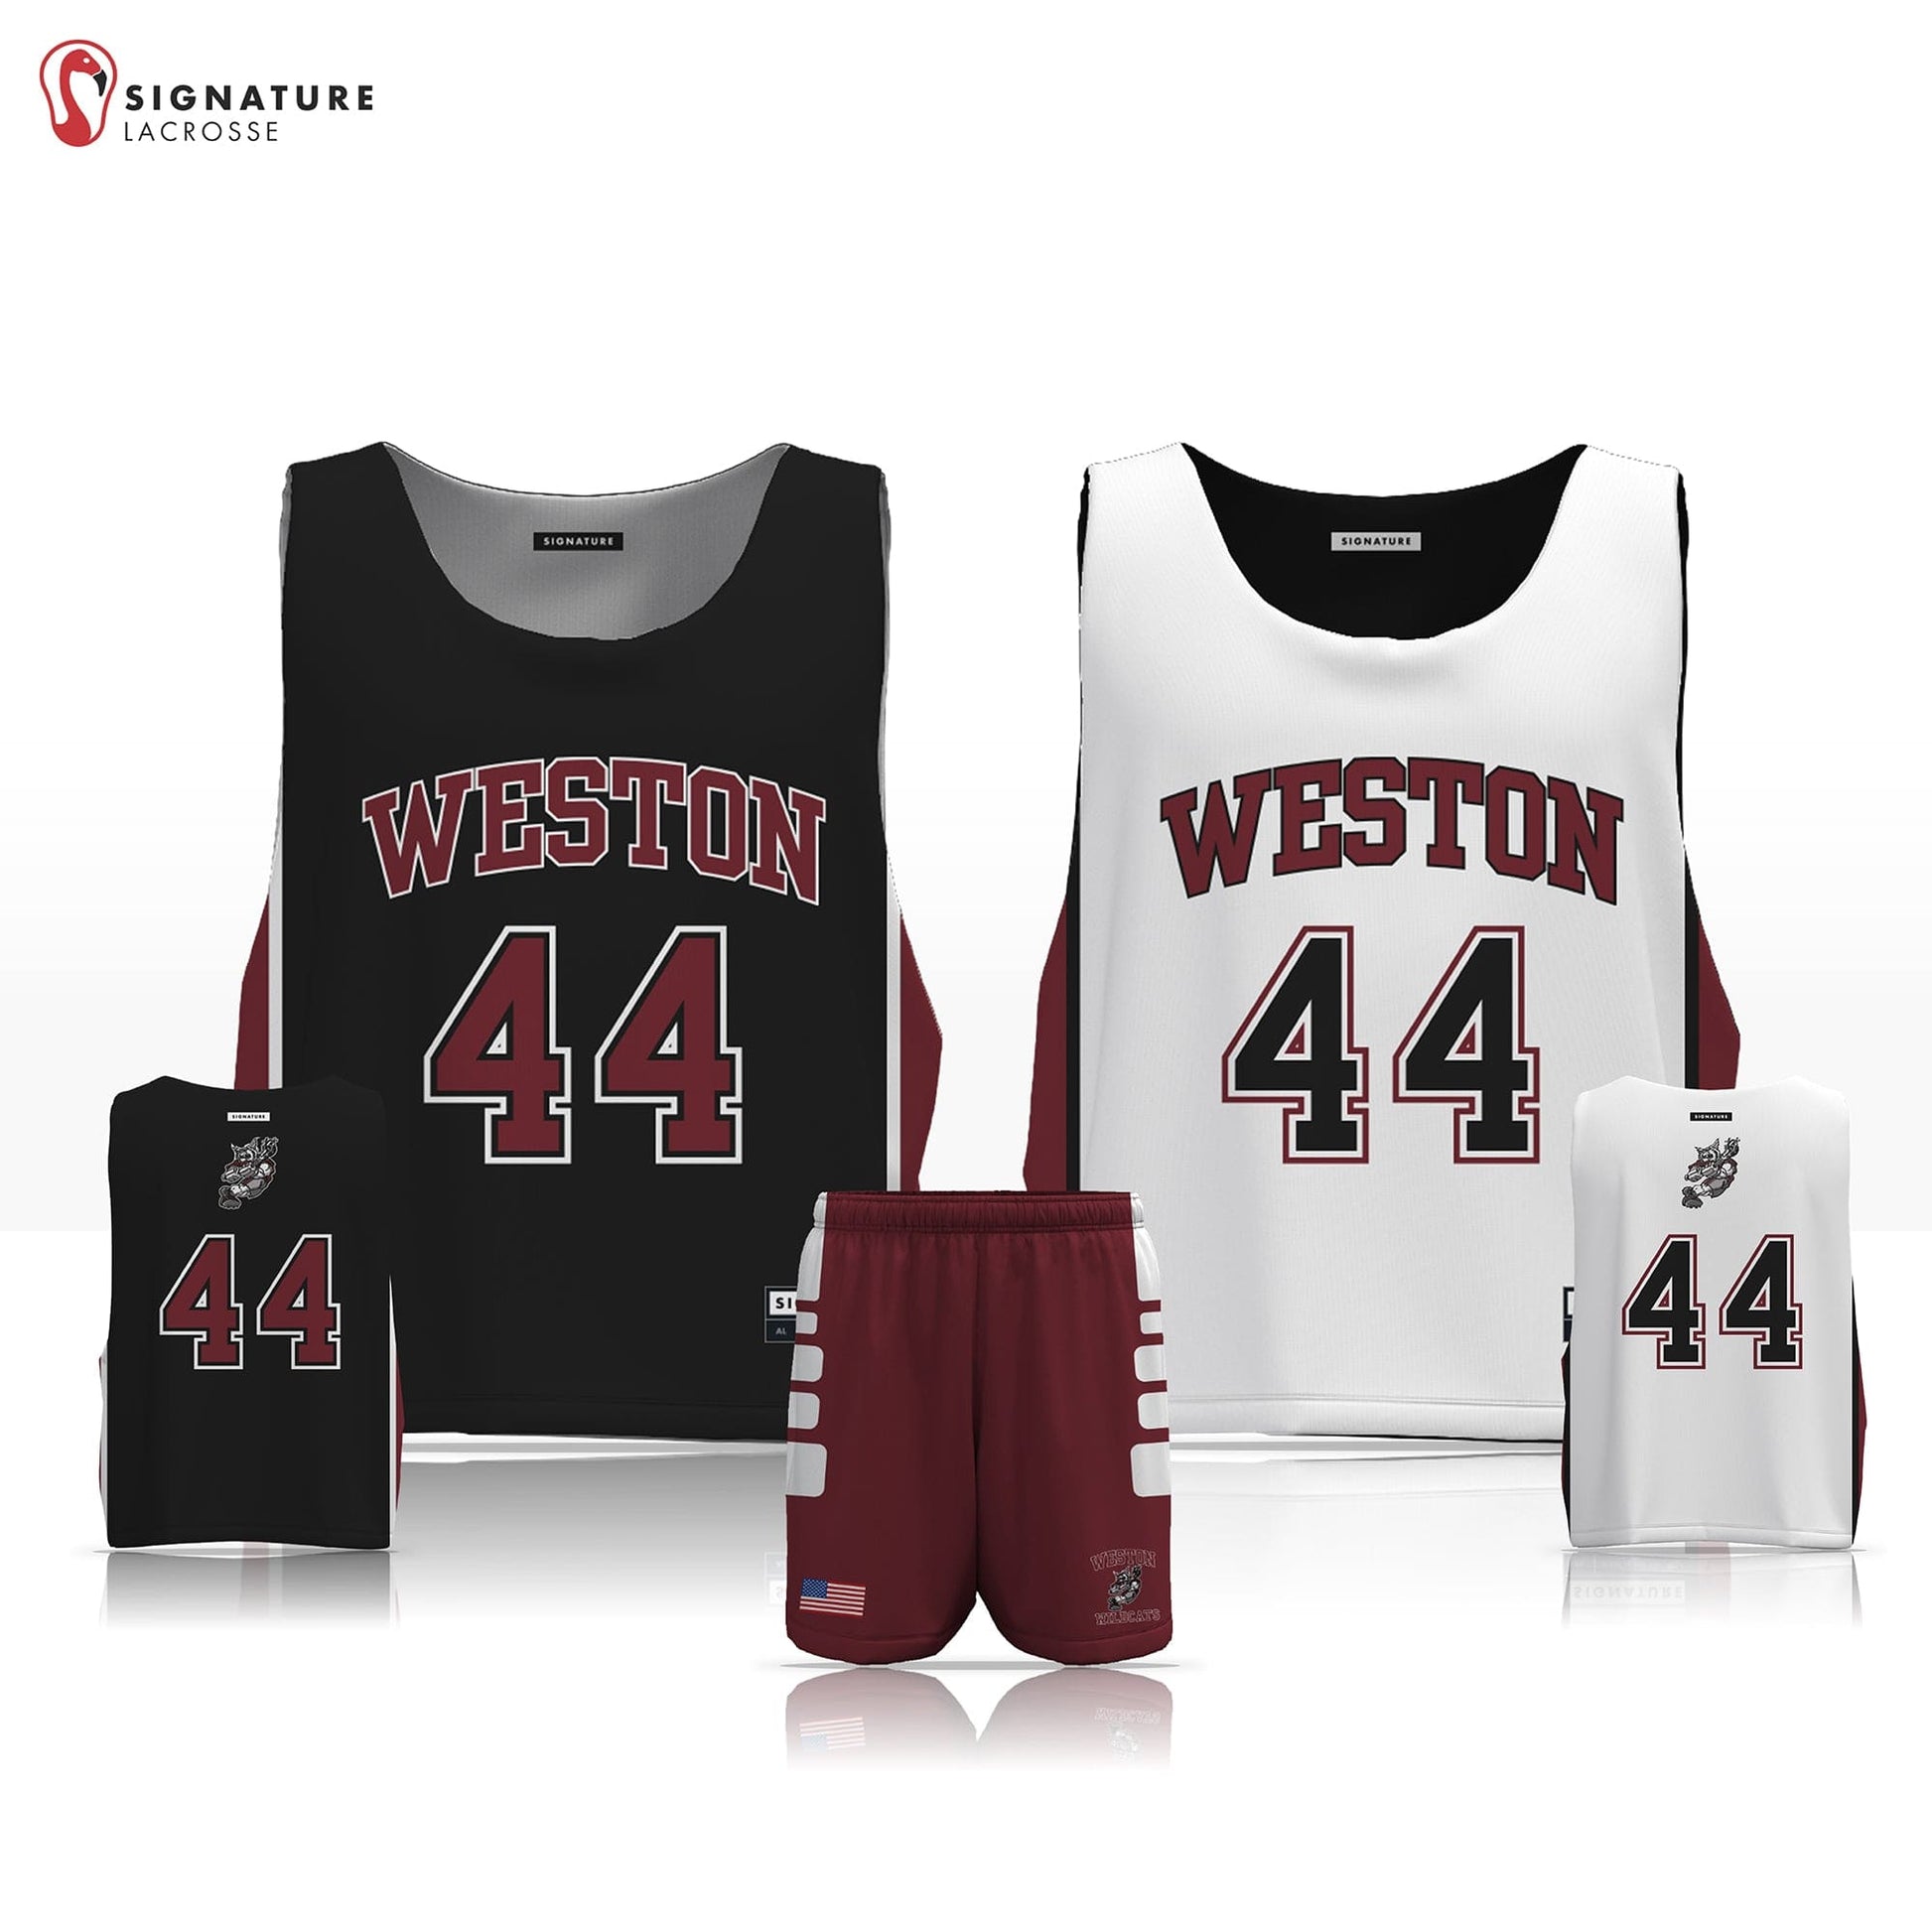 Weston Youth Lacrosse Men's 2 Piece Player Game Package: Grade 7-8 Signature Lacrosse